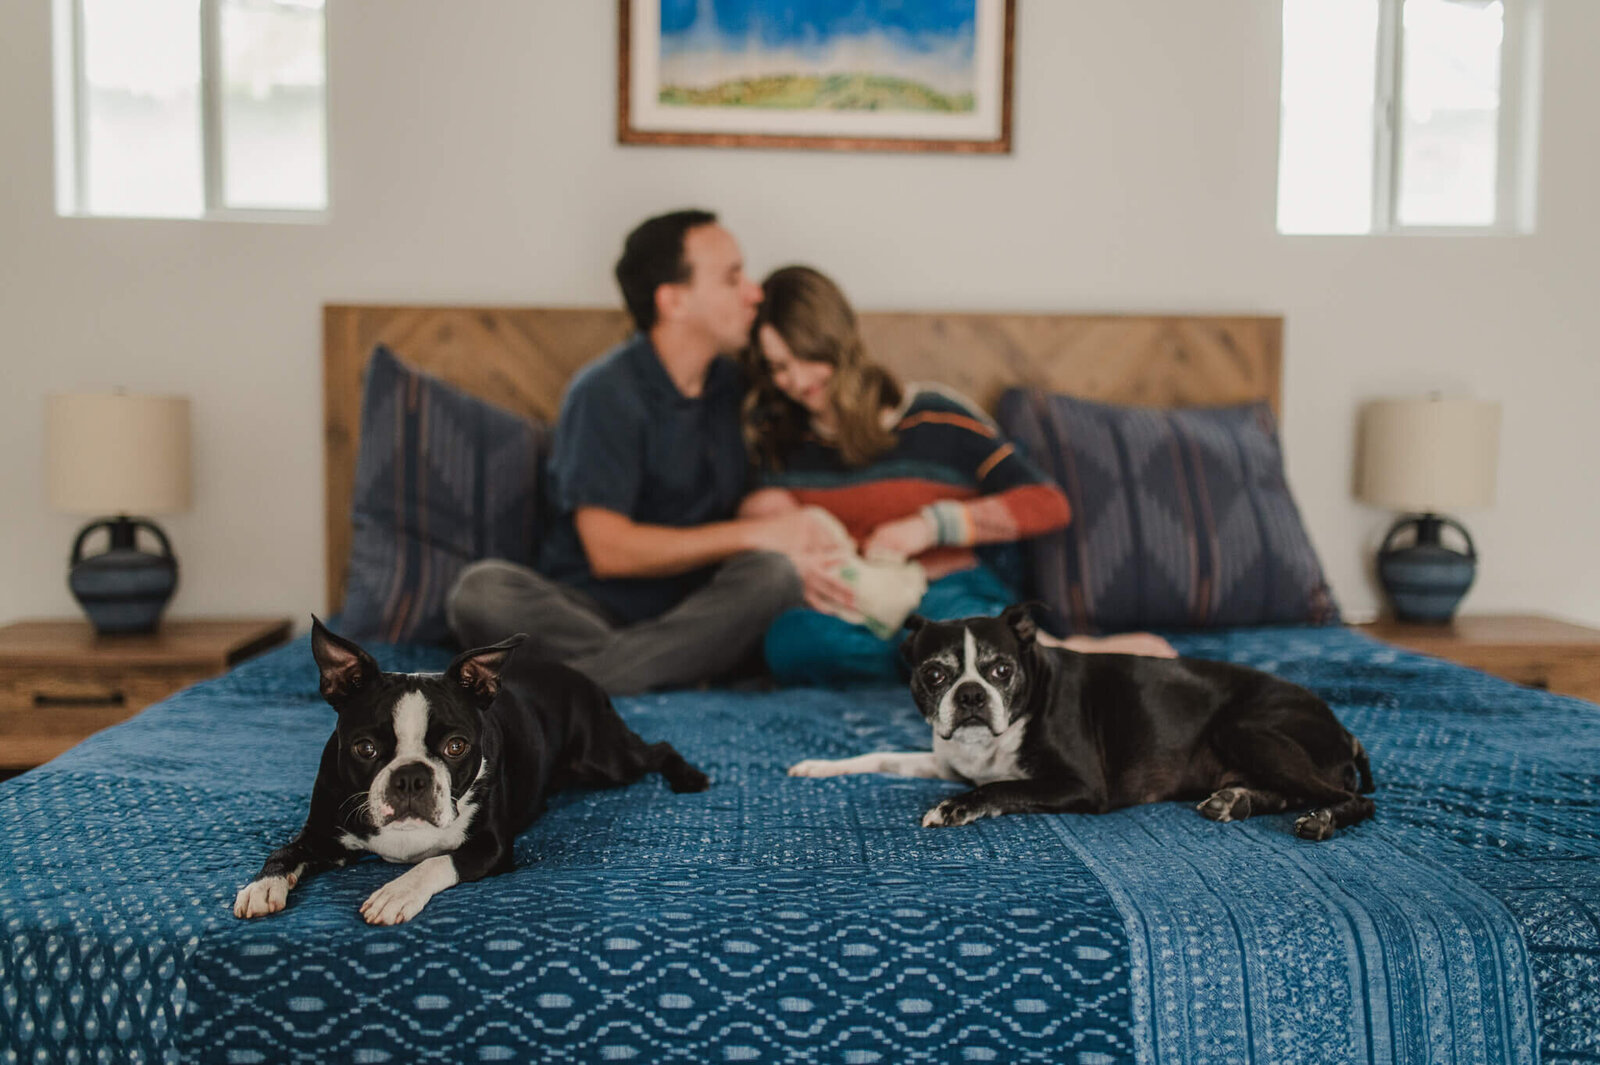 mom and dad snuggle their newborn daughter on their bed while two dogs sit at the foot of the bed looking at the camera